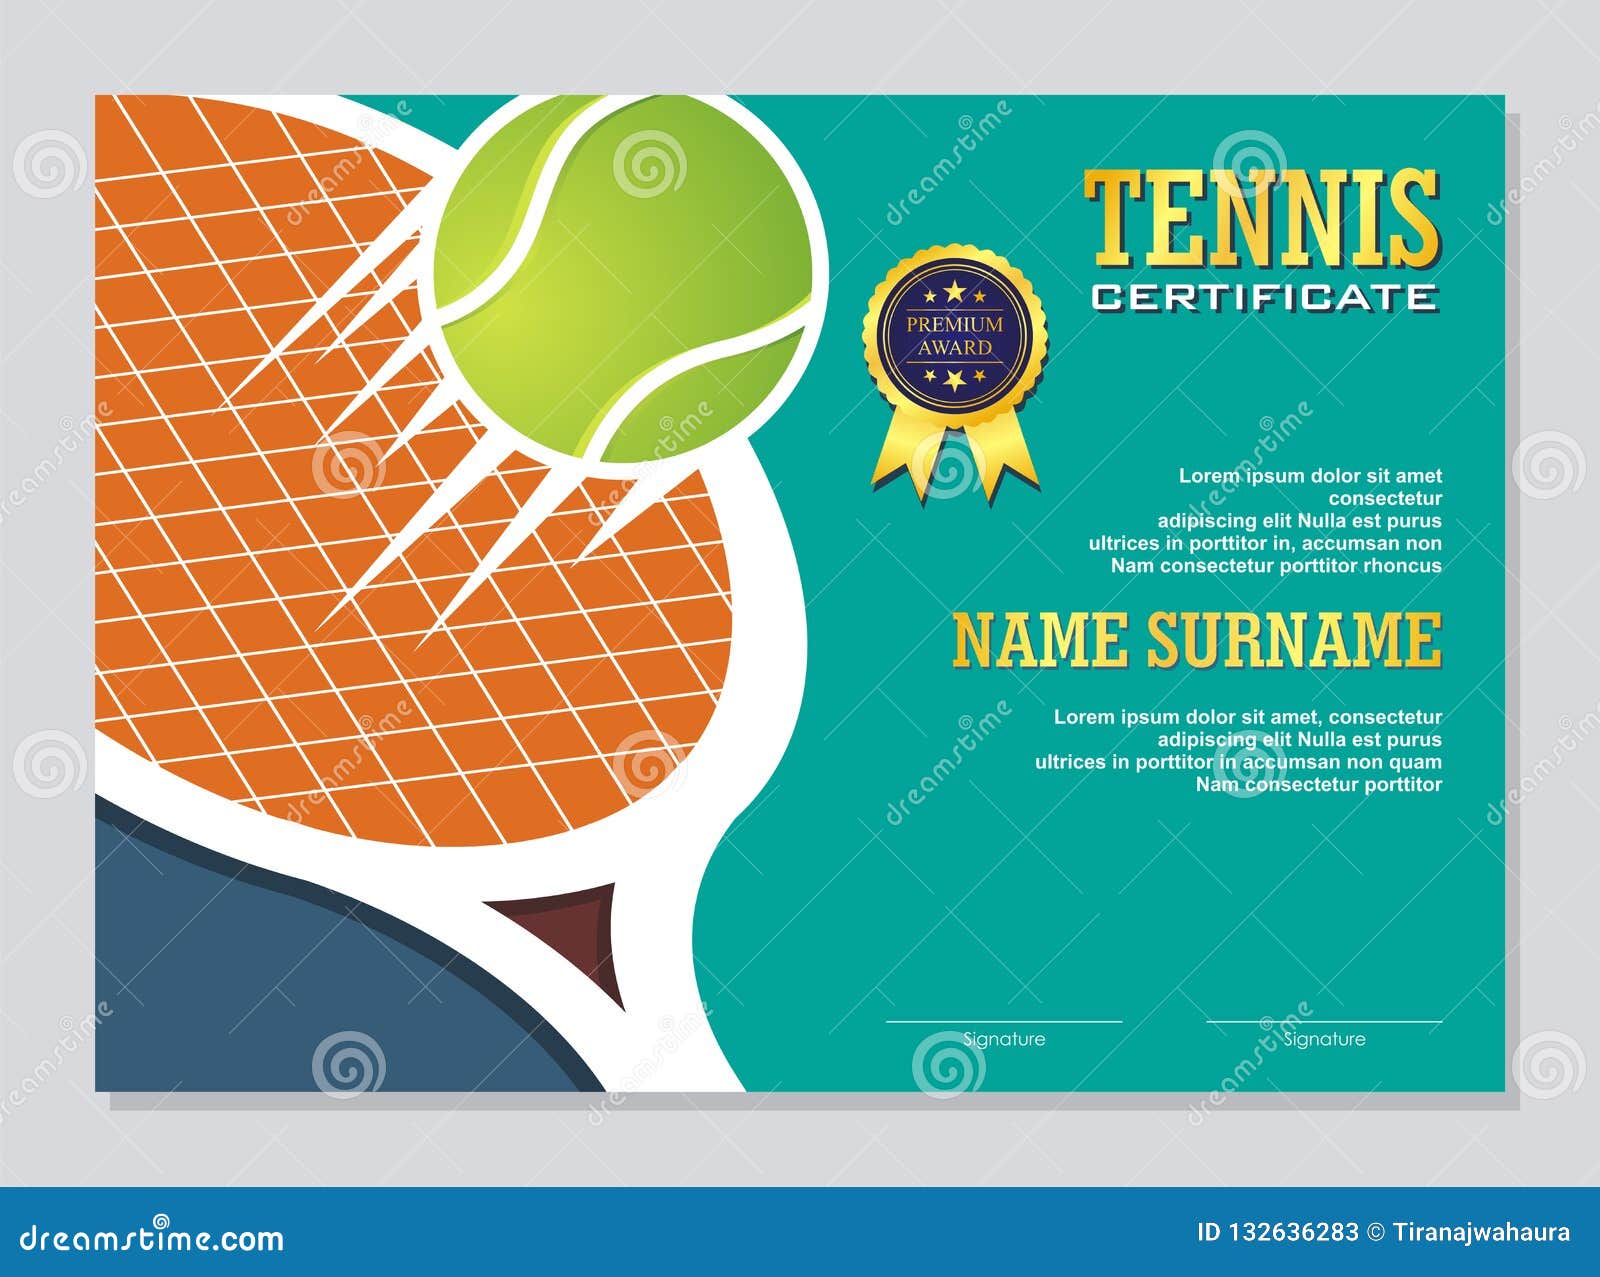 Tennis Certificate - Award Template with Colorful and Stylish Intended For Tennis Certificate Template Free